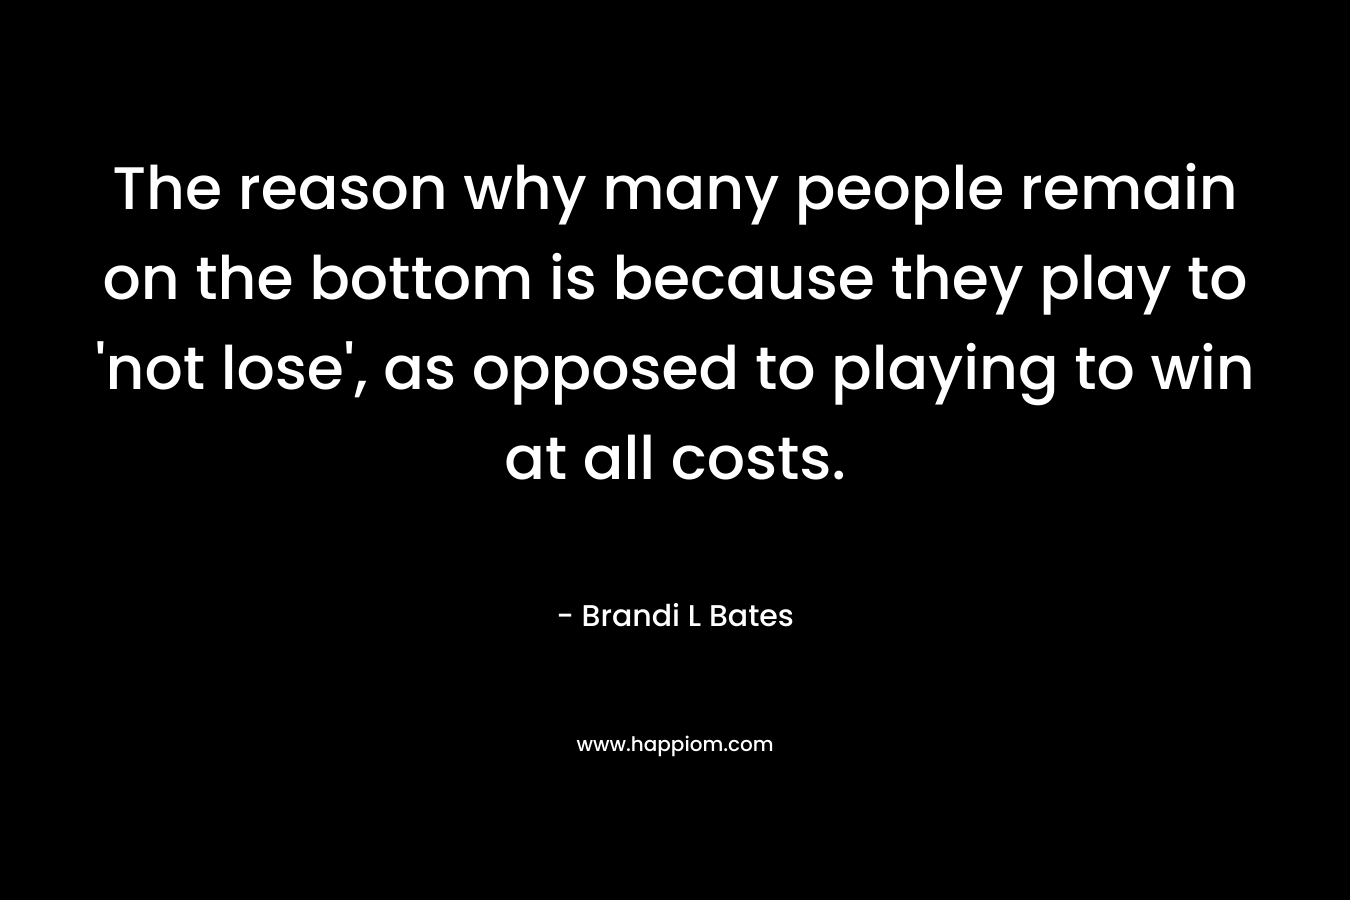 The reason why many people remain on the bottom is because they play to ‘not lose’, as opposed to playing to win at all costs. – Brandi L Bates